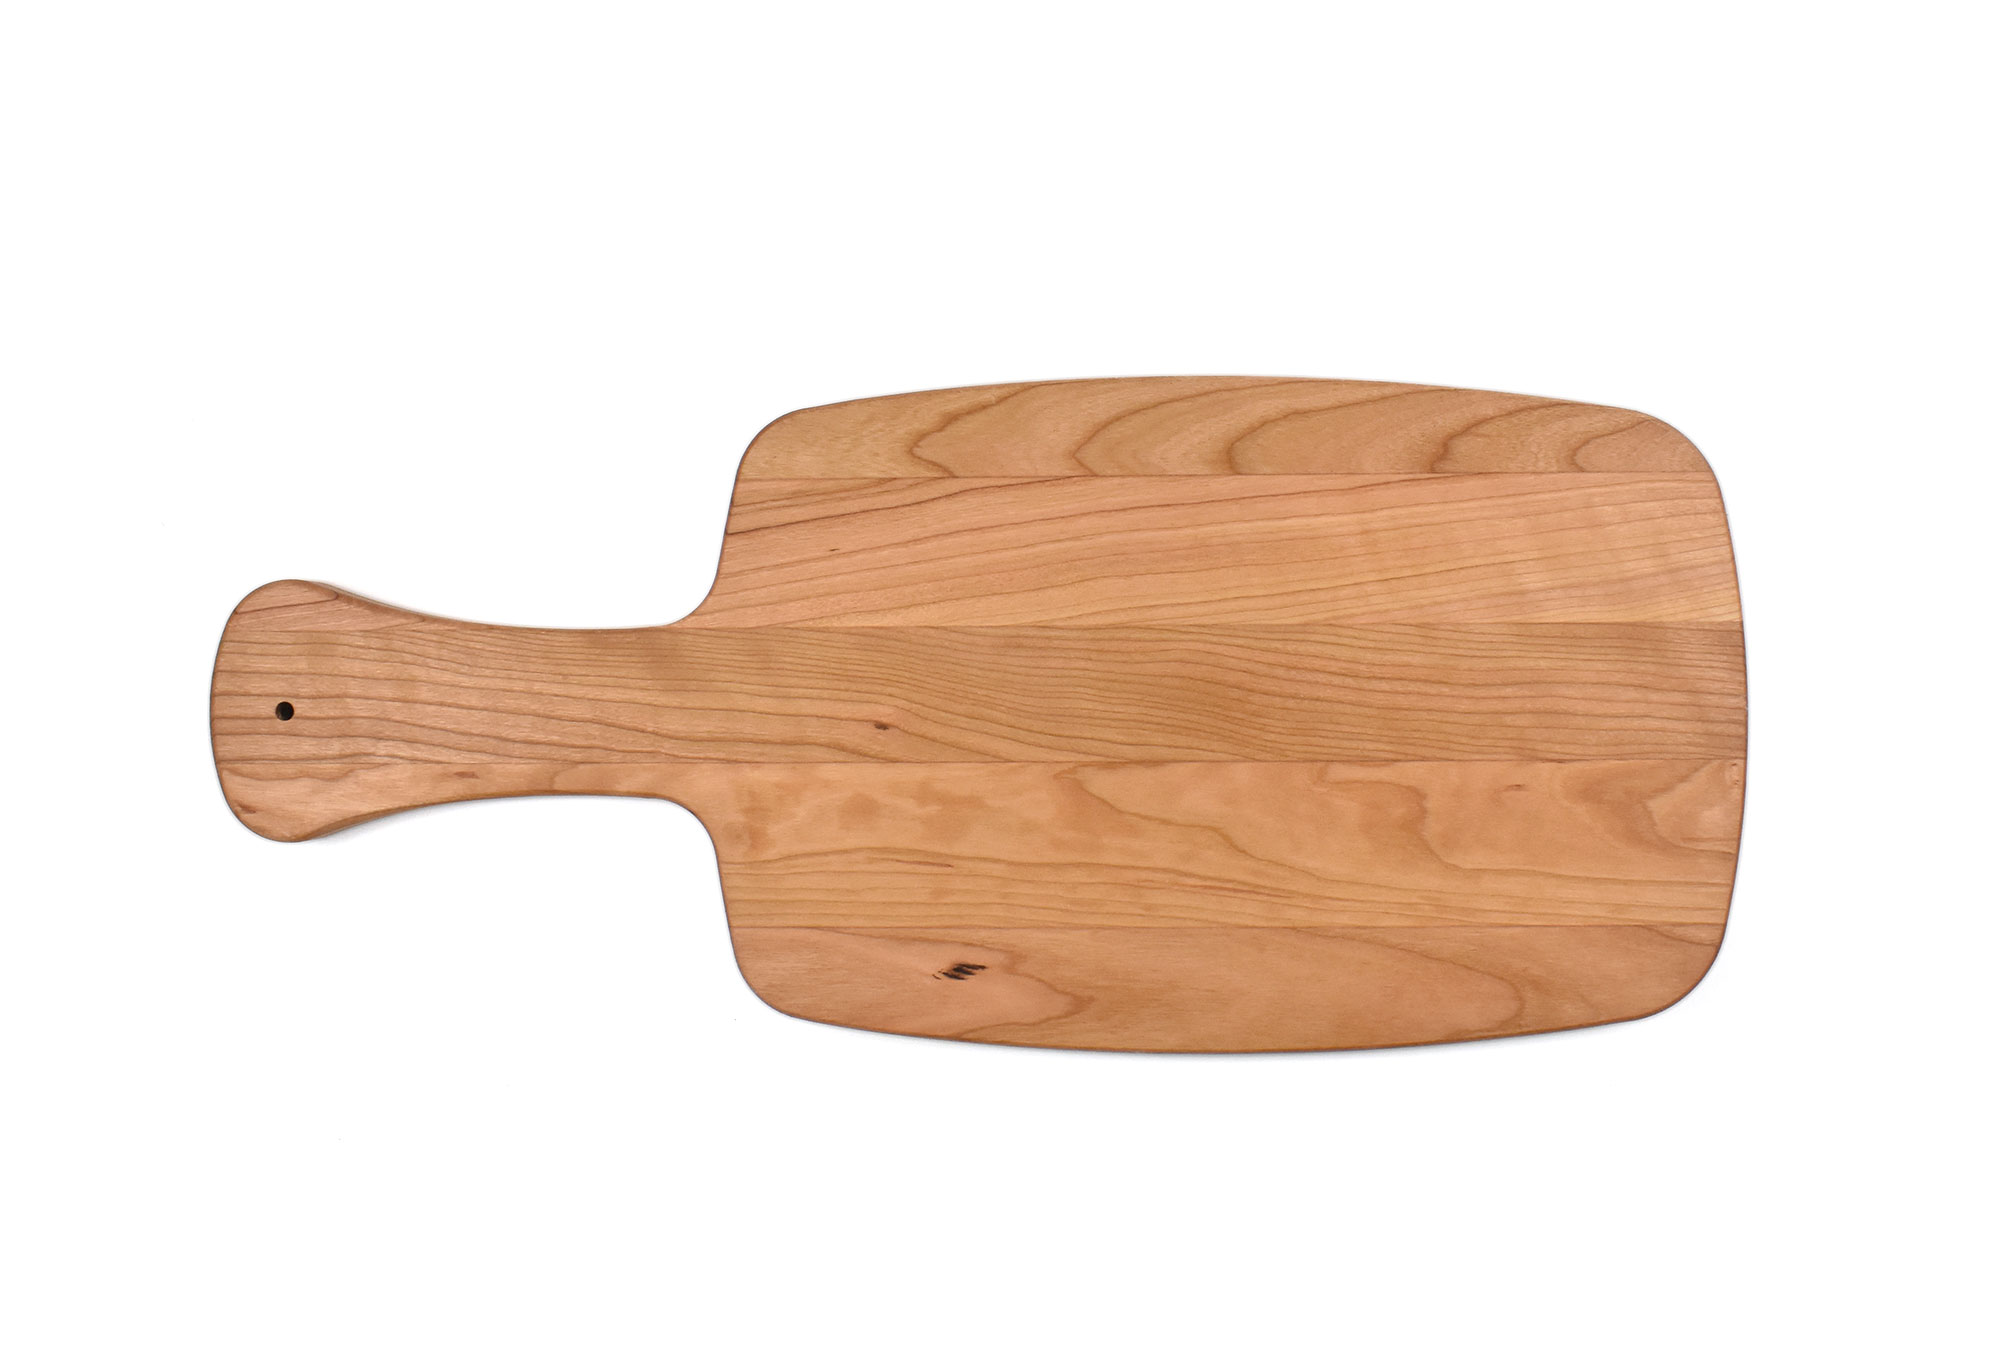 Large Cherry Cutting Board with Handle